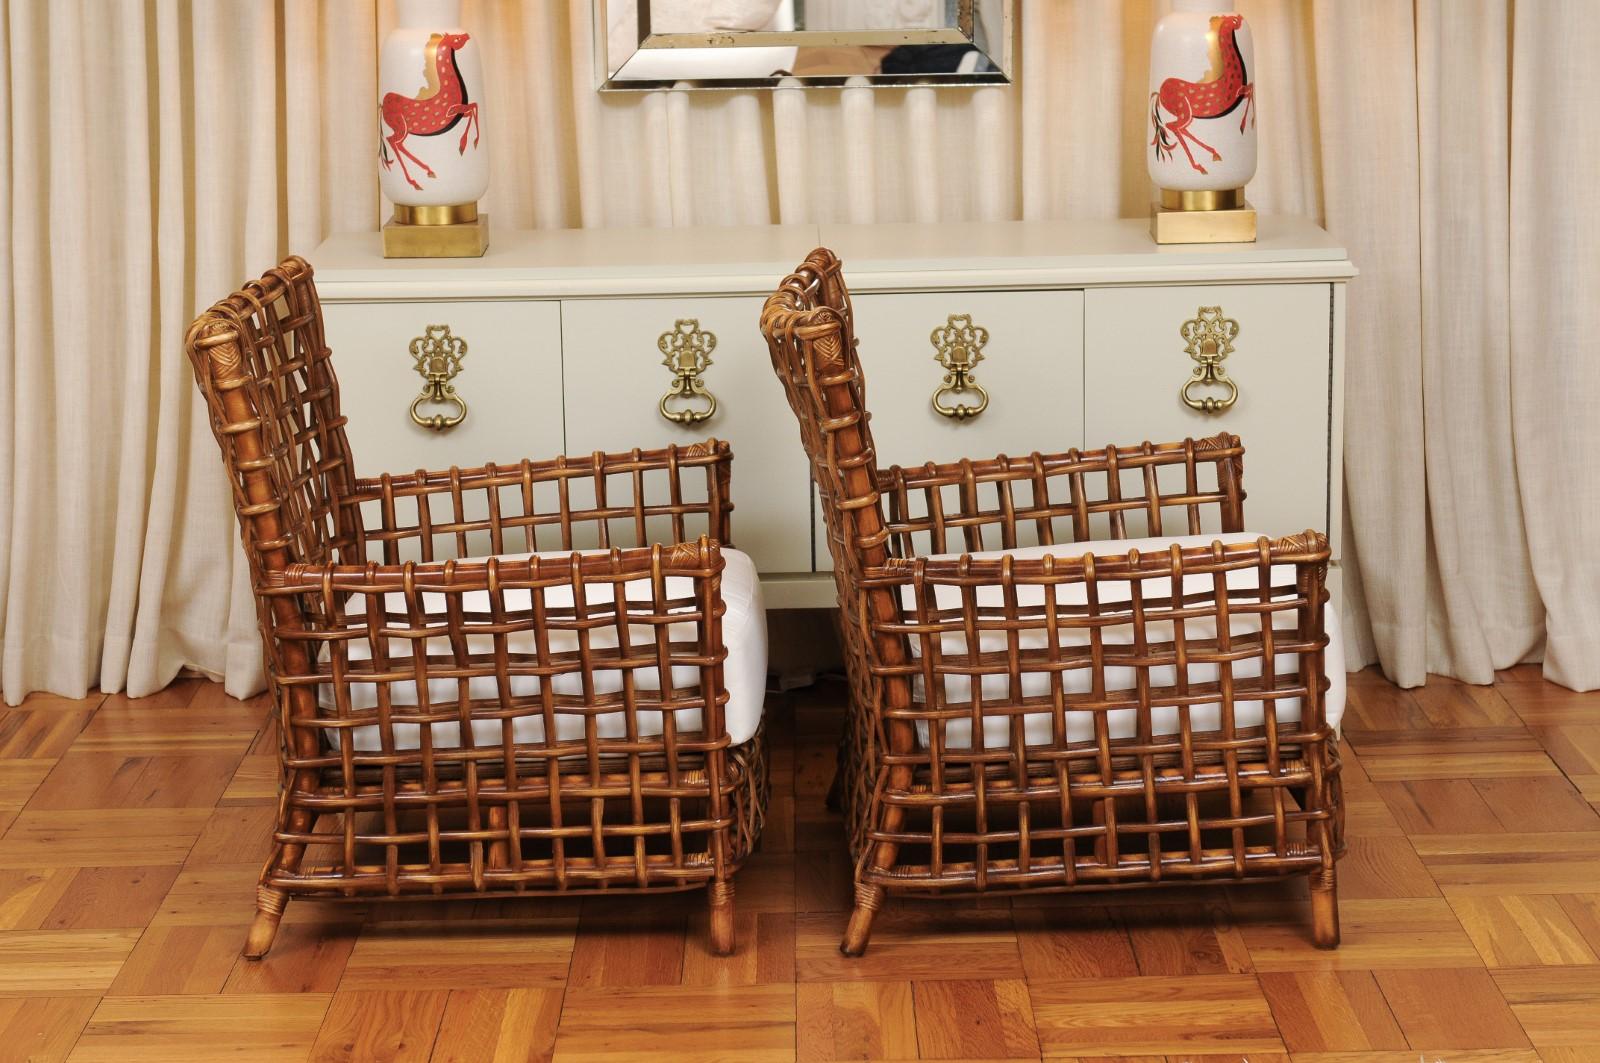 Fabulous Pair of Caramel Rattan and Cane Club Chairs - 2 Pair Available In Excellent Condition For Sale In Atlanta, GA